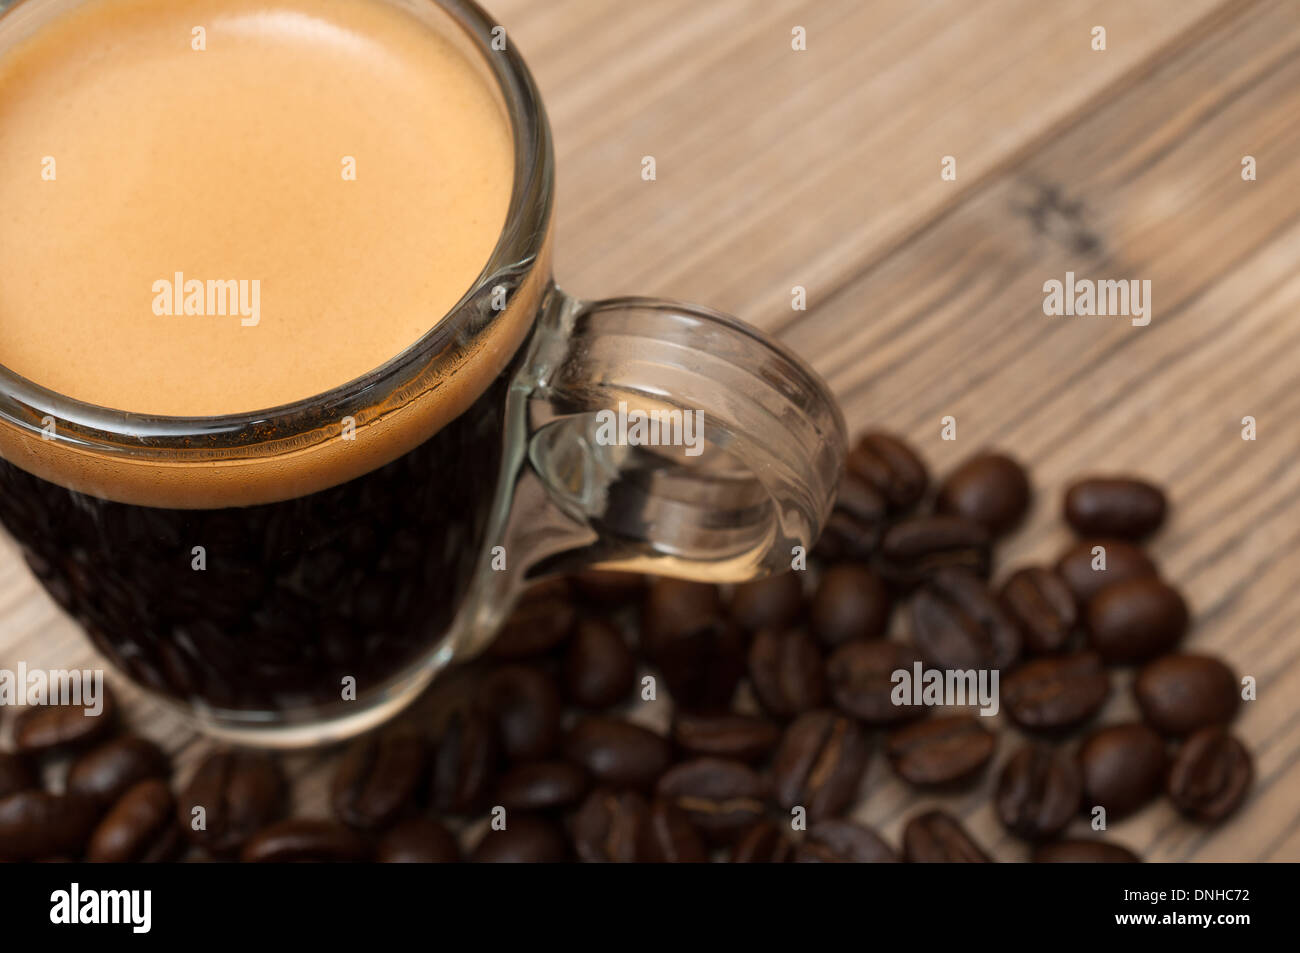 Glass Cup of Espresso Coffee on Wooden Table With Coffee Beans - Shallow Depth of Field Stock Photo